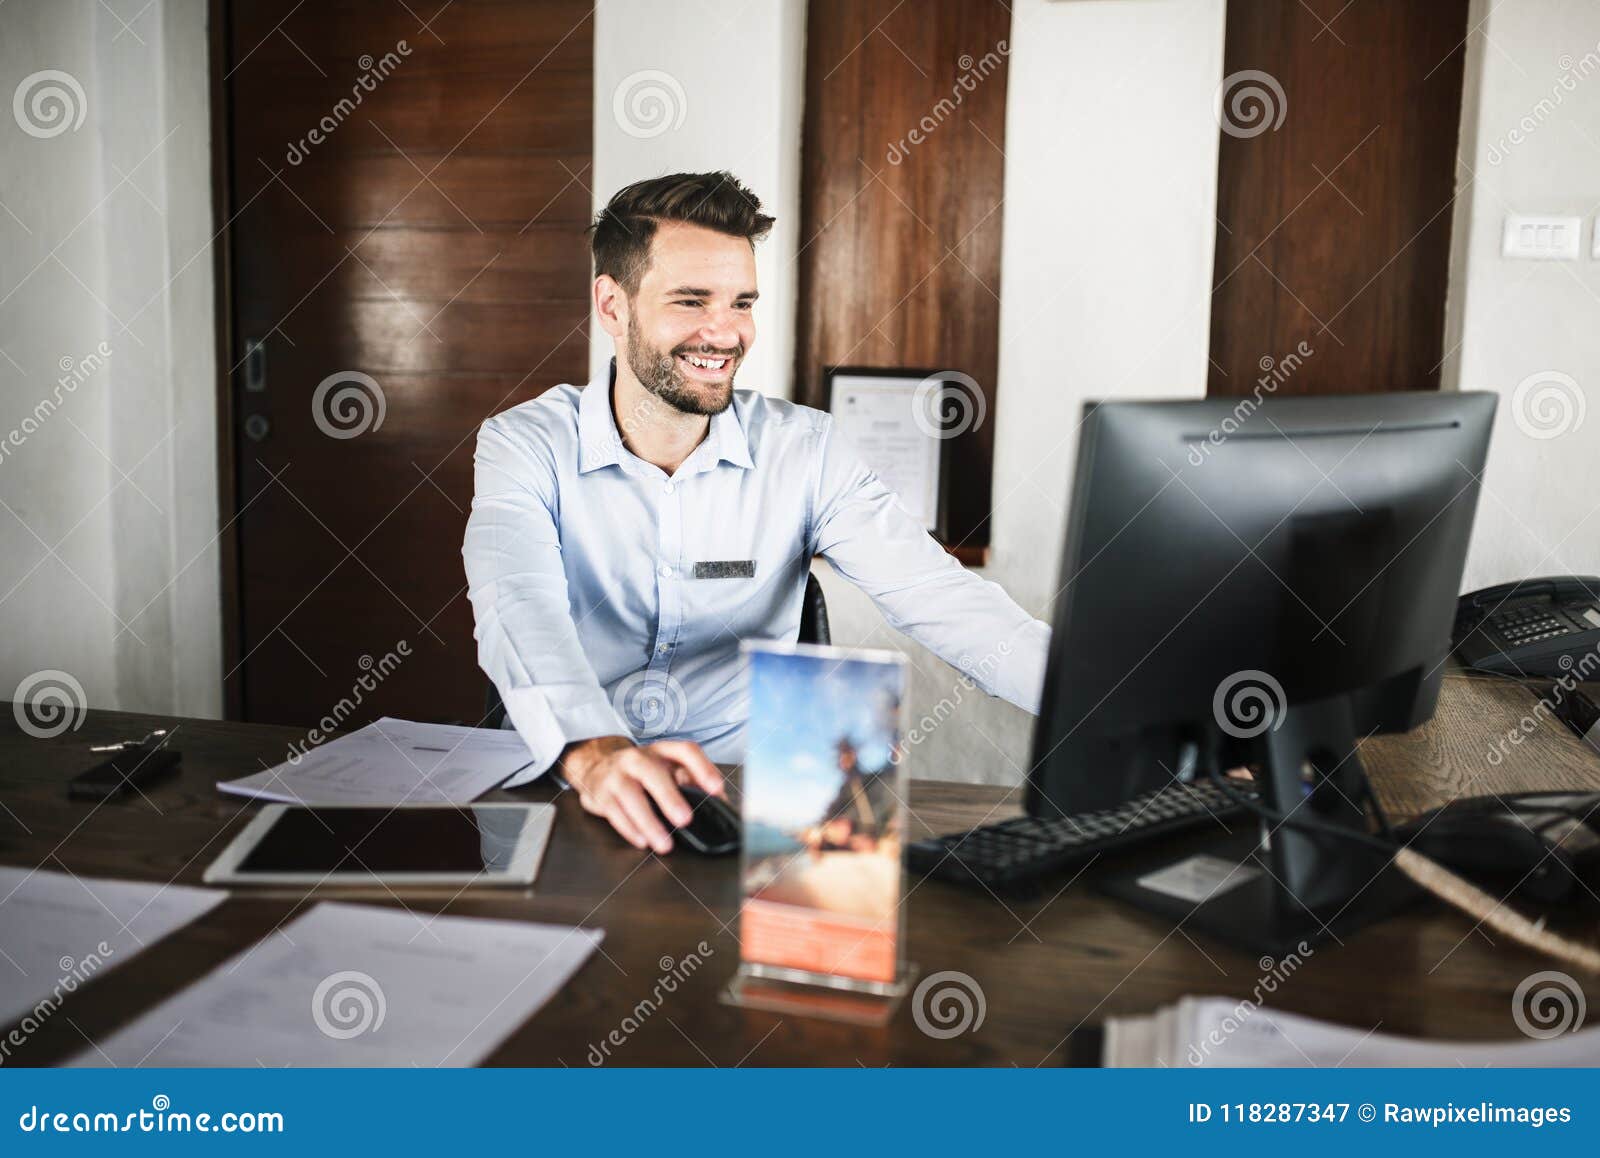 Receptionist Working At The Front Desk Stock Image Image Of